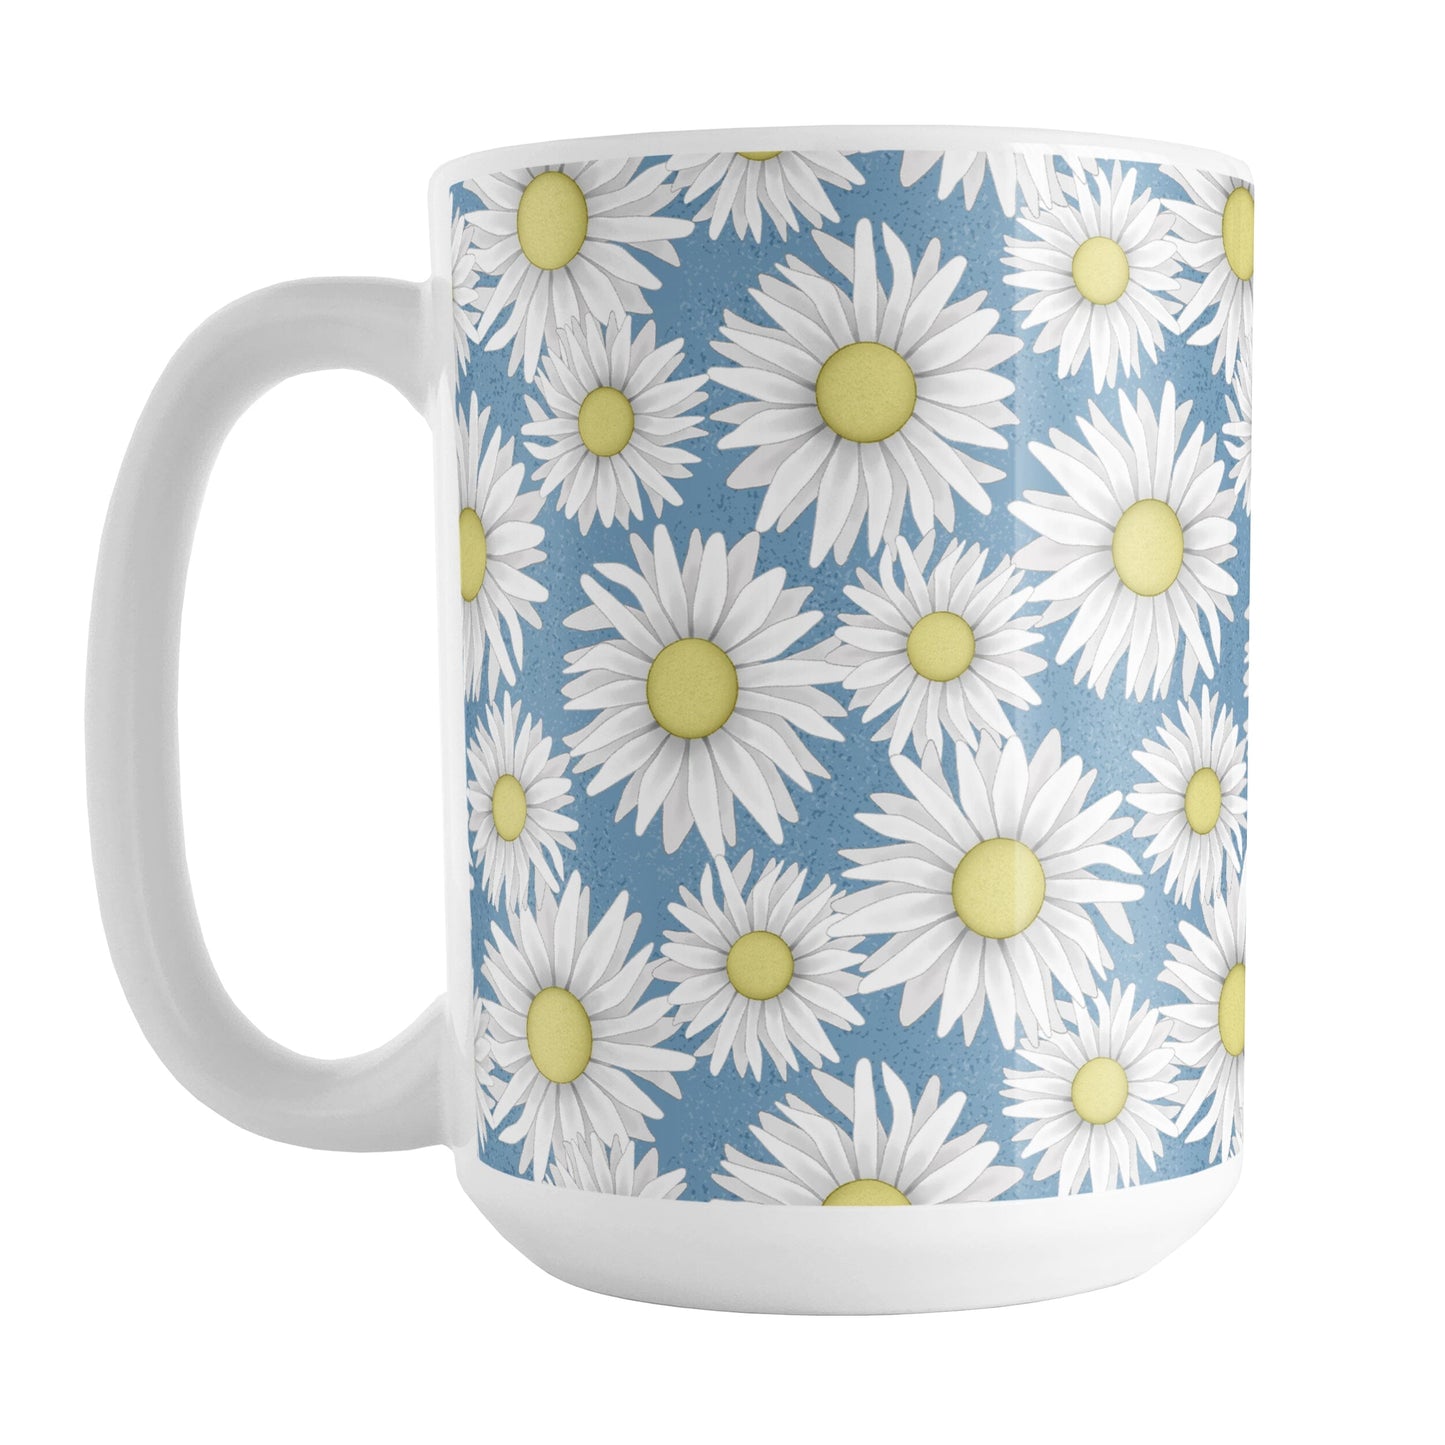 Blue Daisy Pattern Mug (15oz) at Amy's Coffee Mugs. A ceramic coffee mug designed with a pretty pattern of white daisy flowers with yellow centers over a speckled blue background that wraps around the mug to the handle. 